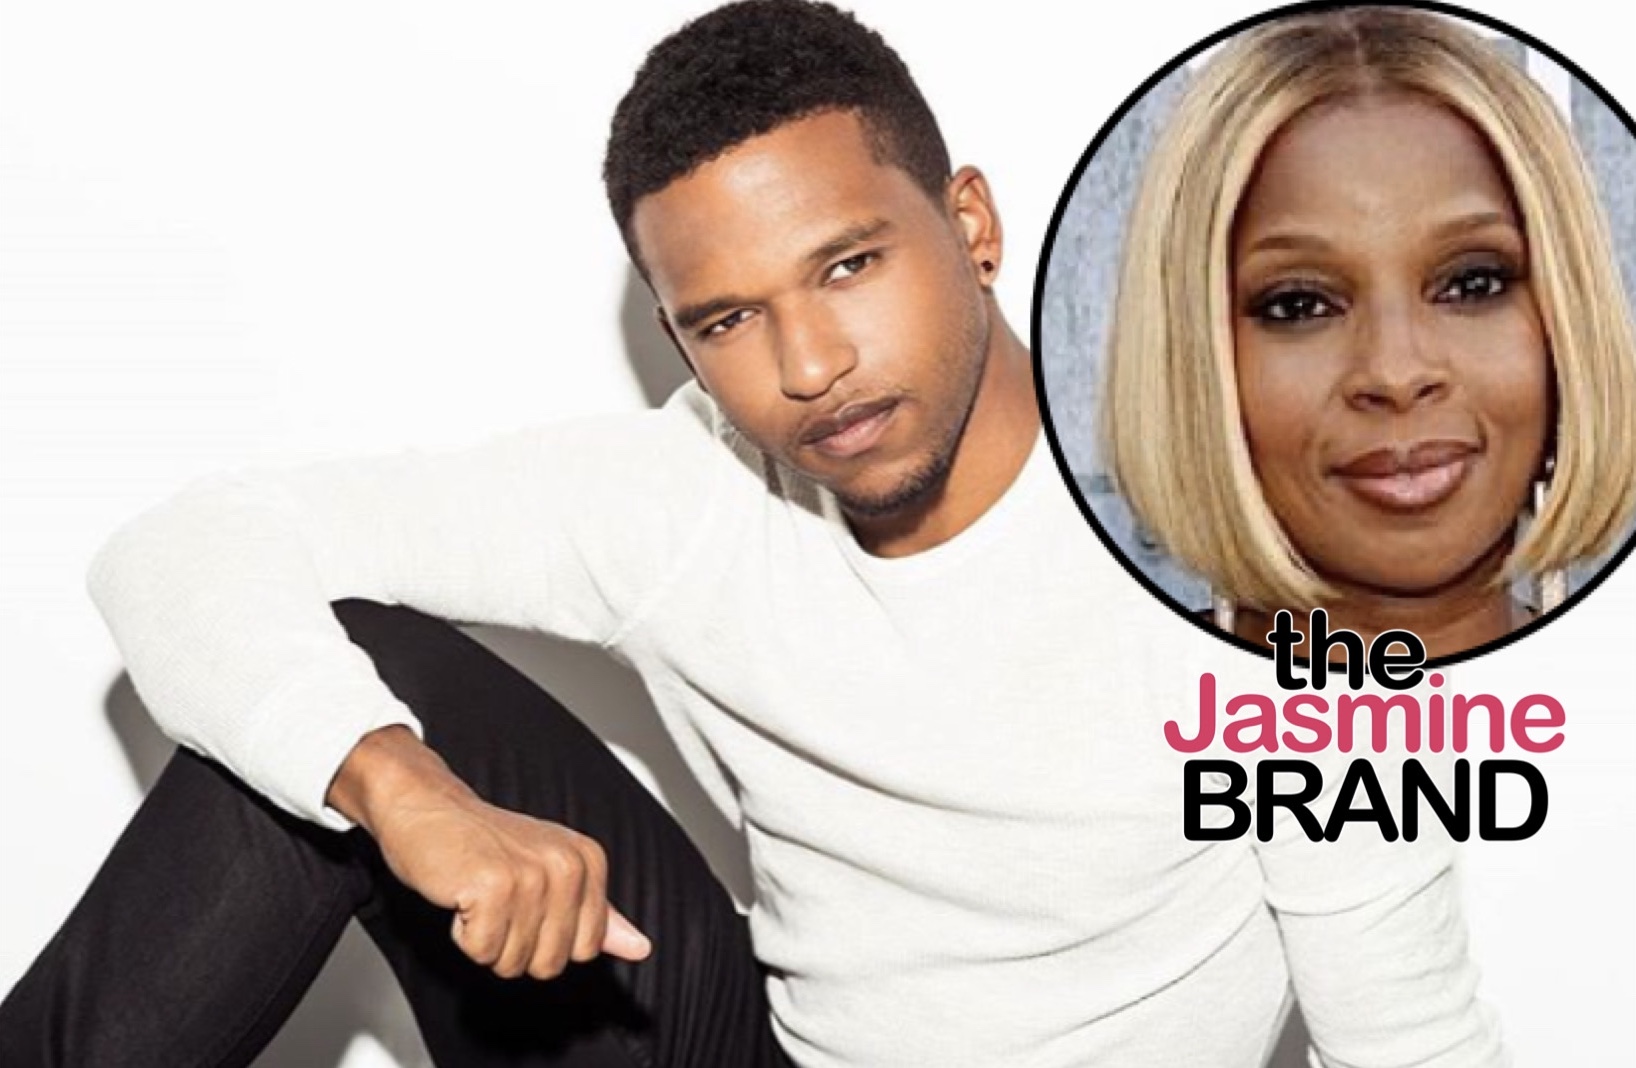 Mary J. Blige to lead 'Power' sequel series for Starz 